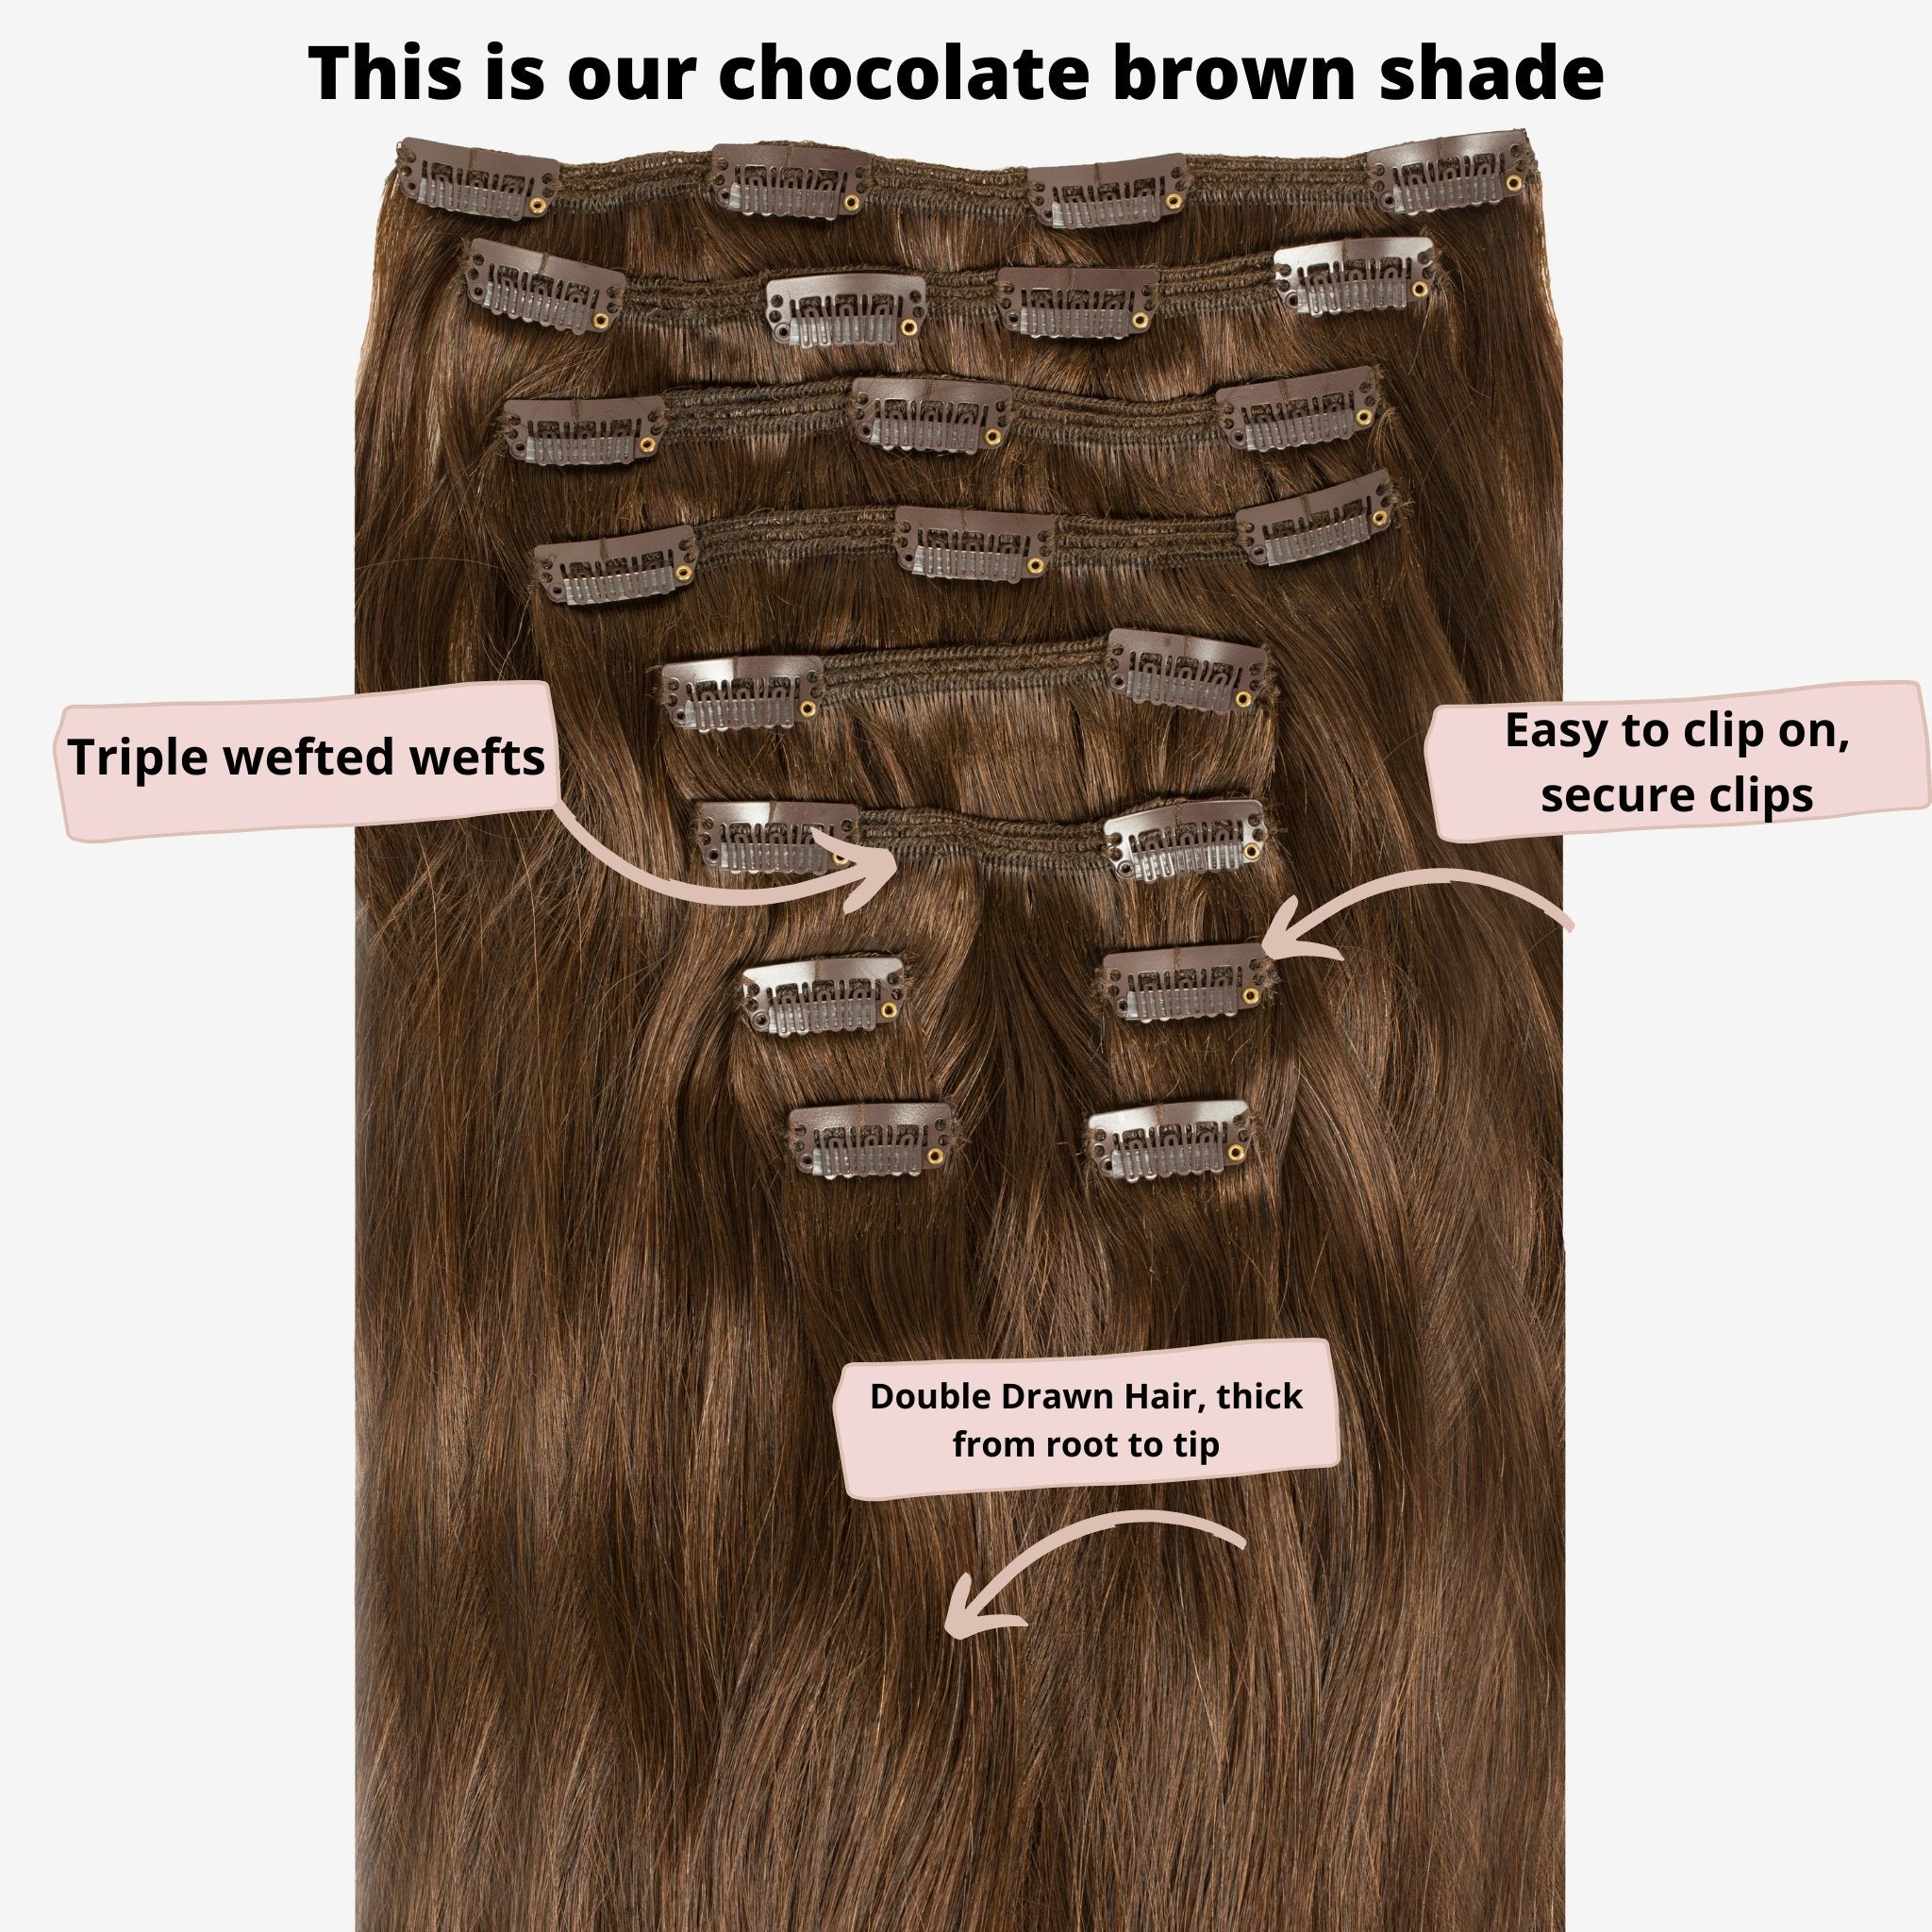 Chocolate Brown Hair Extensions (#2) - Aashi Beauty